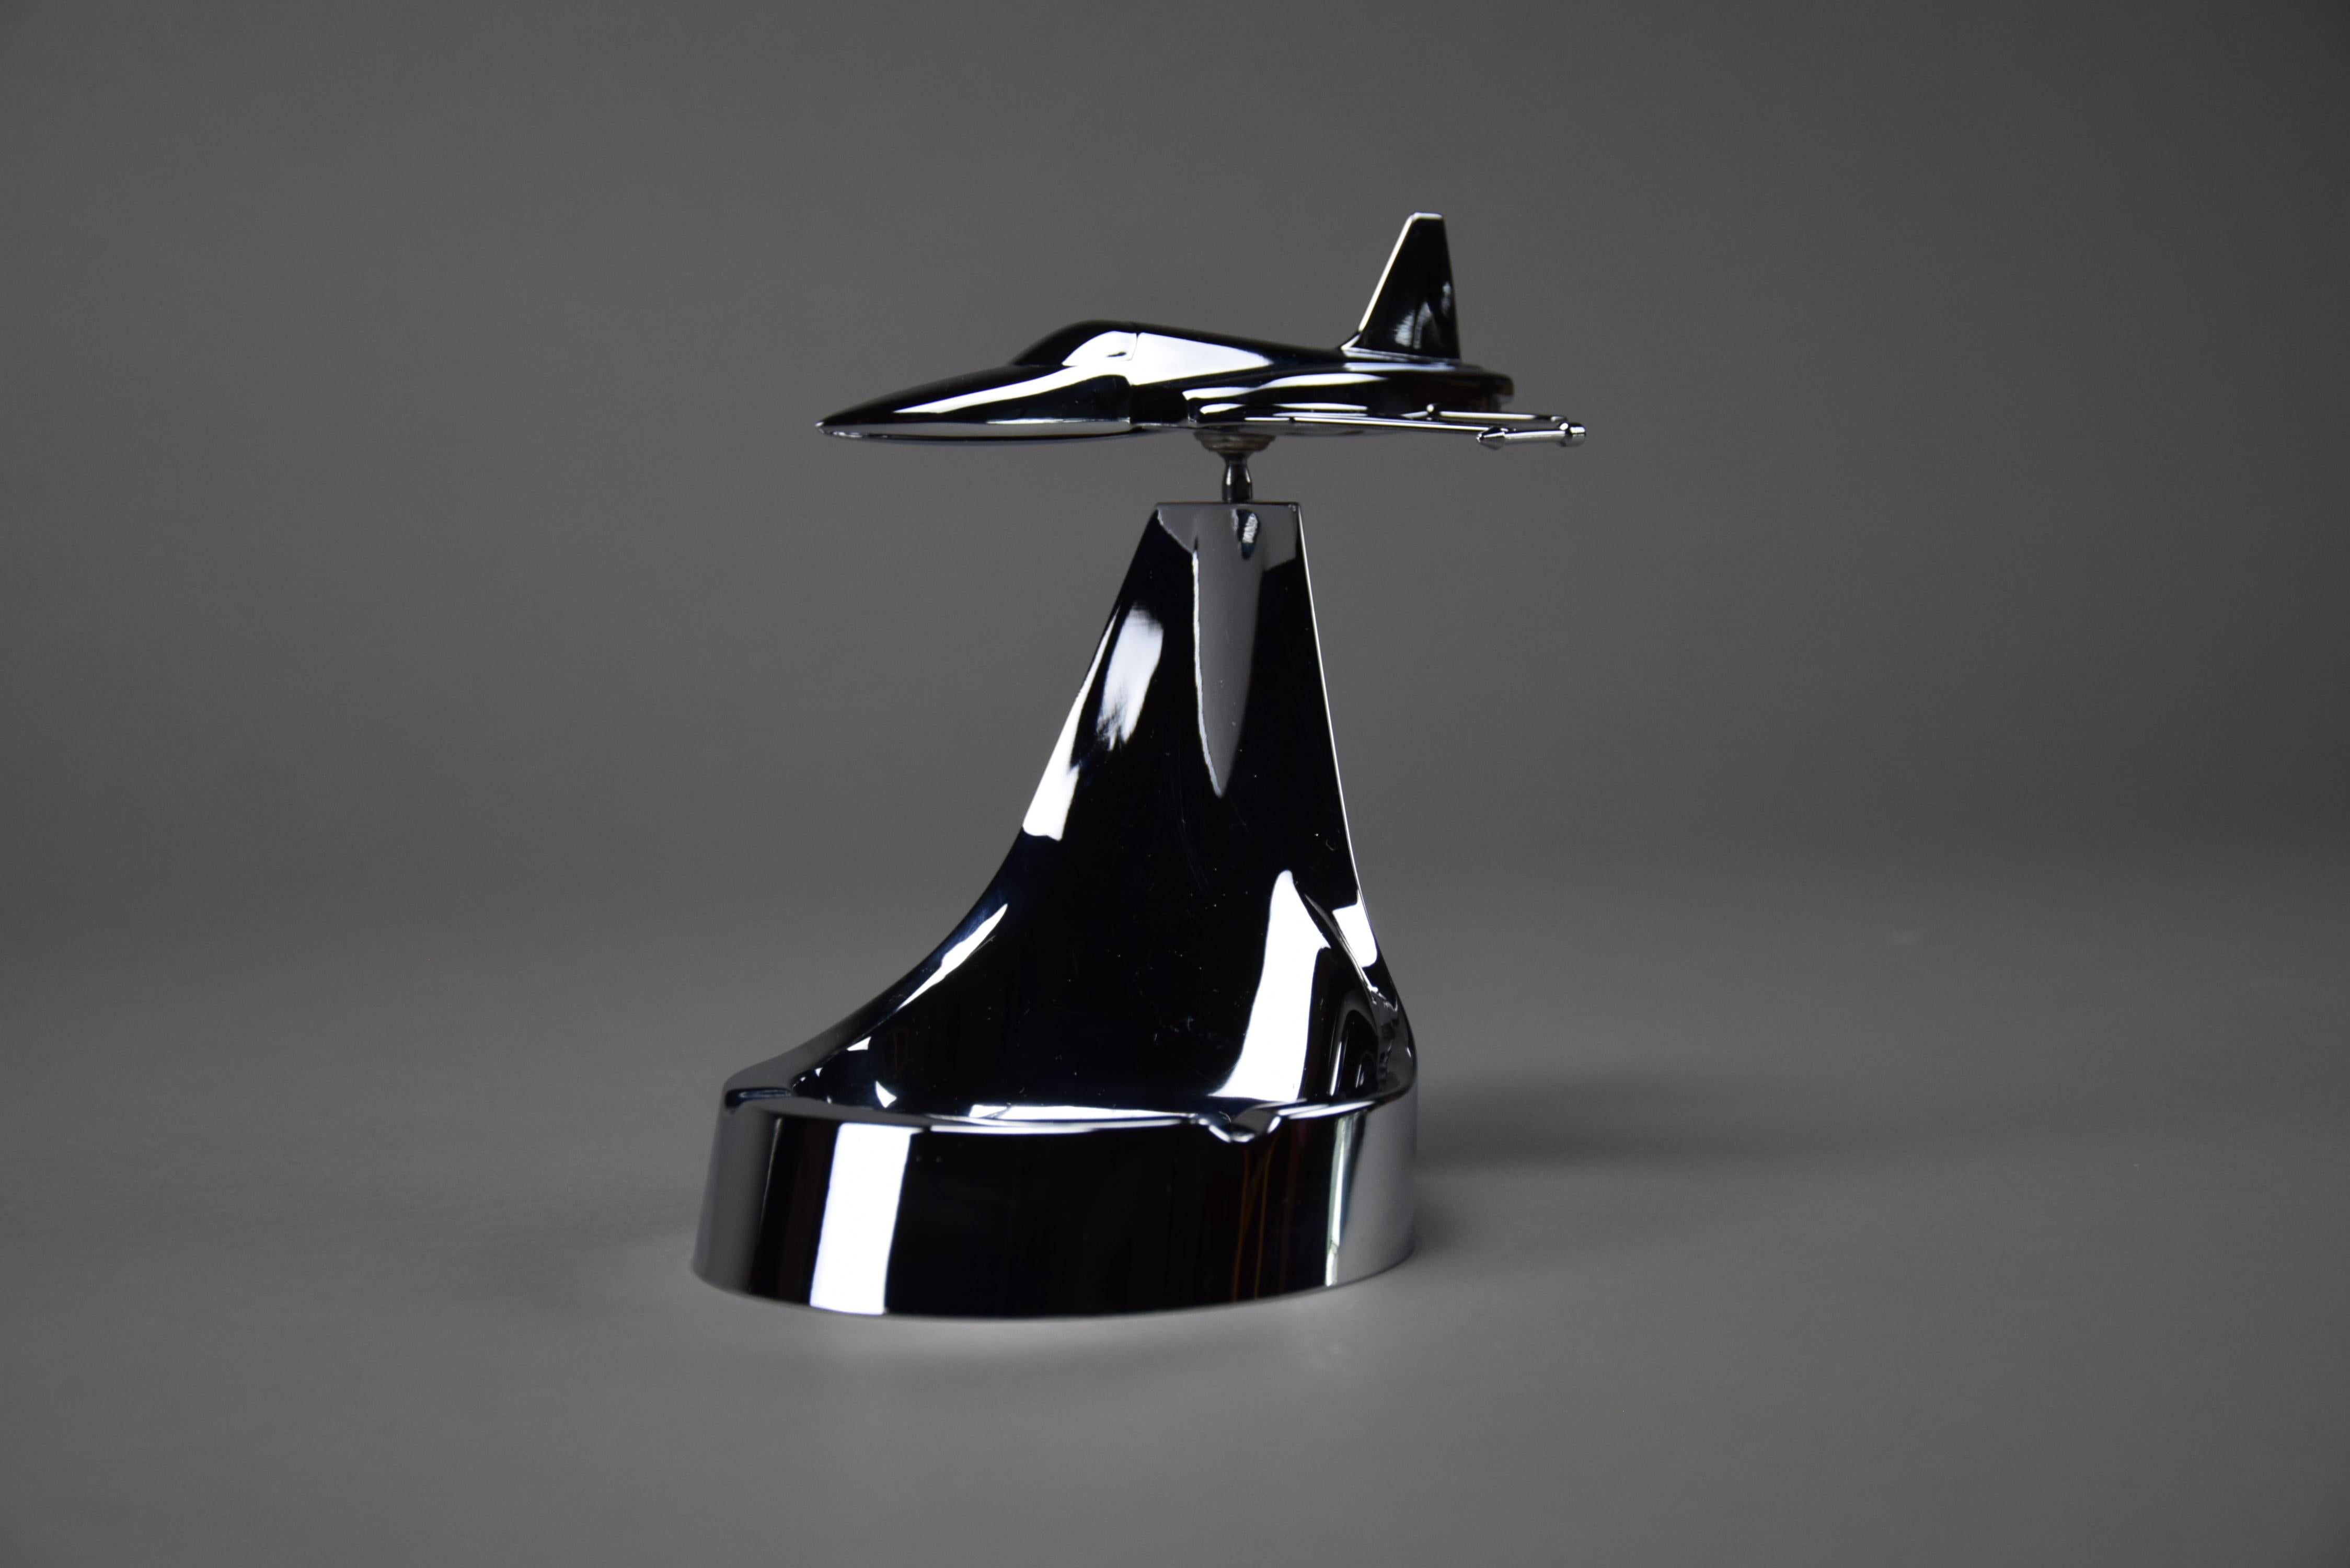 Modern Northtrop F-5 Supersonic Fighter Aircraft Promotional Ashtray